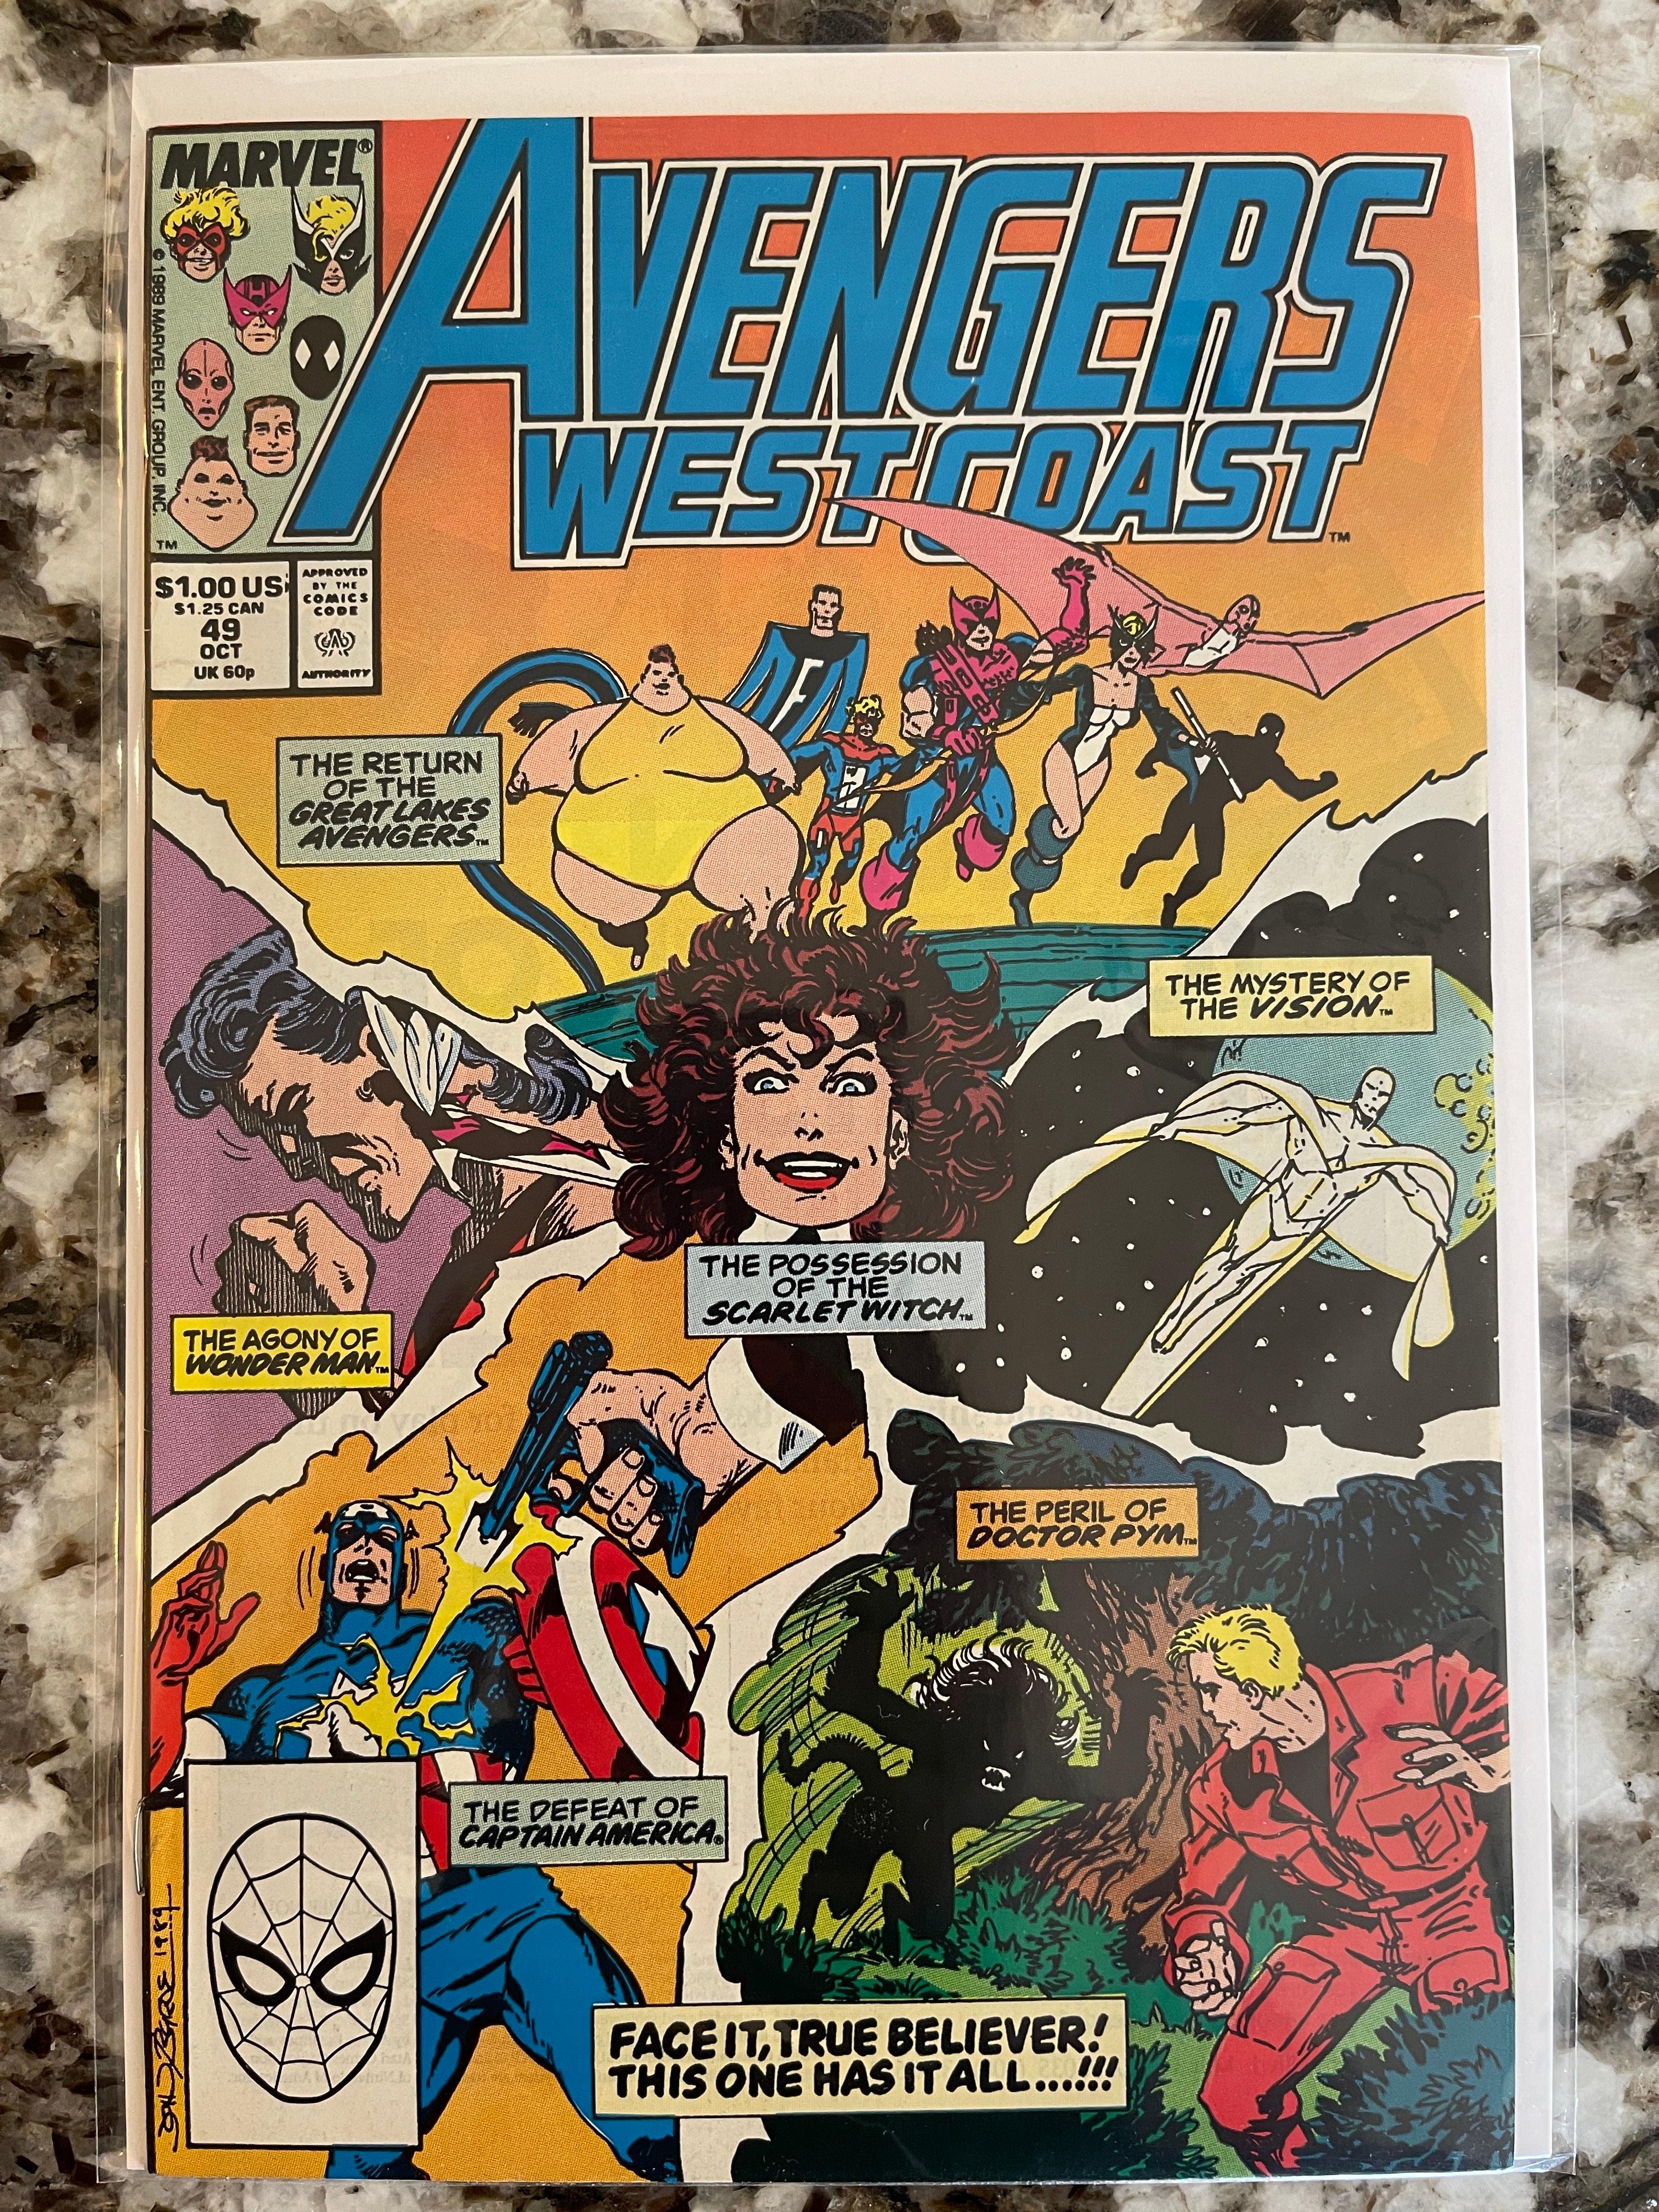 Avengers West Coast Comic #49 Marvel 1989 Copper Age VISIONQUEST STORYLINE